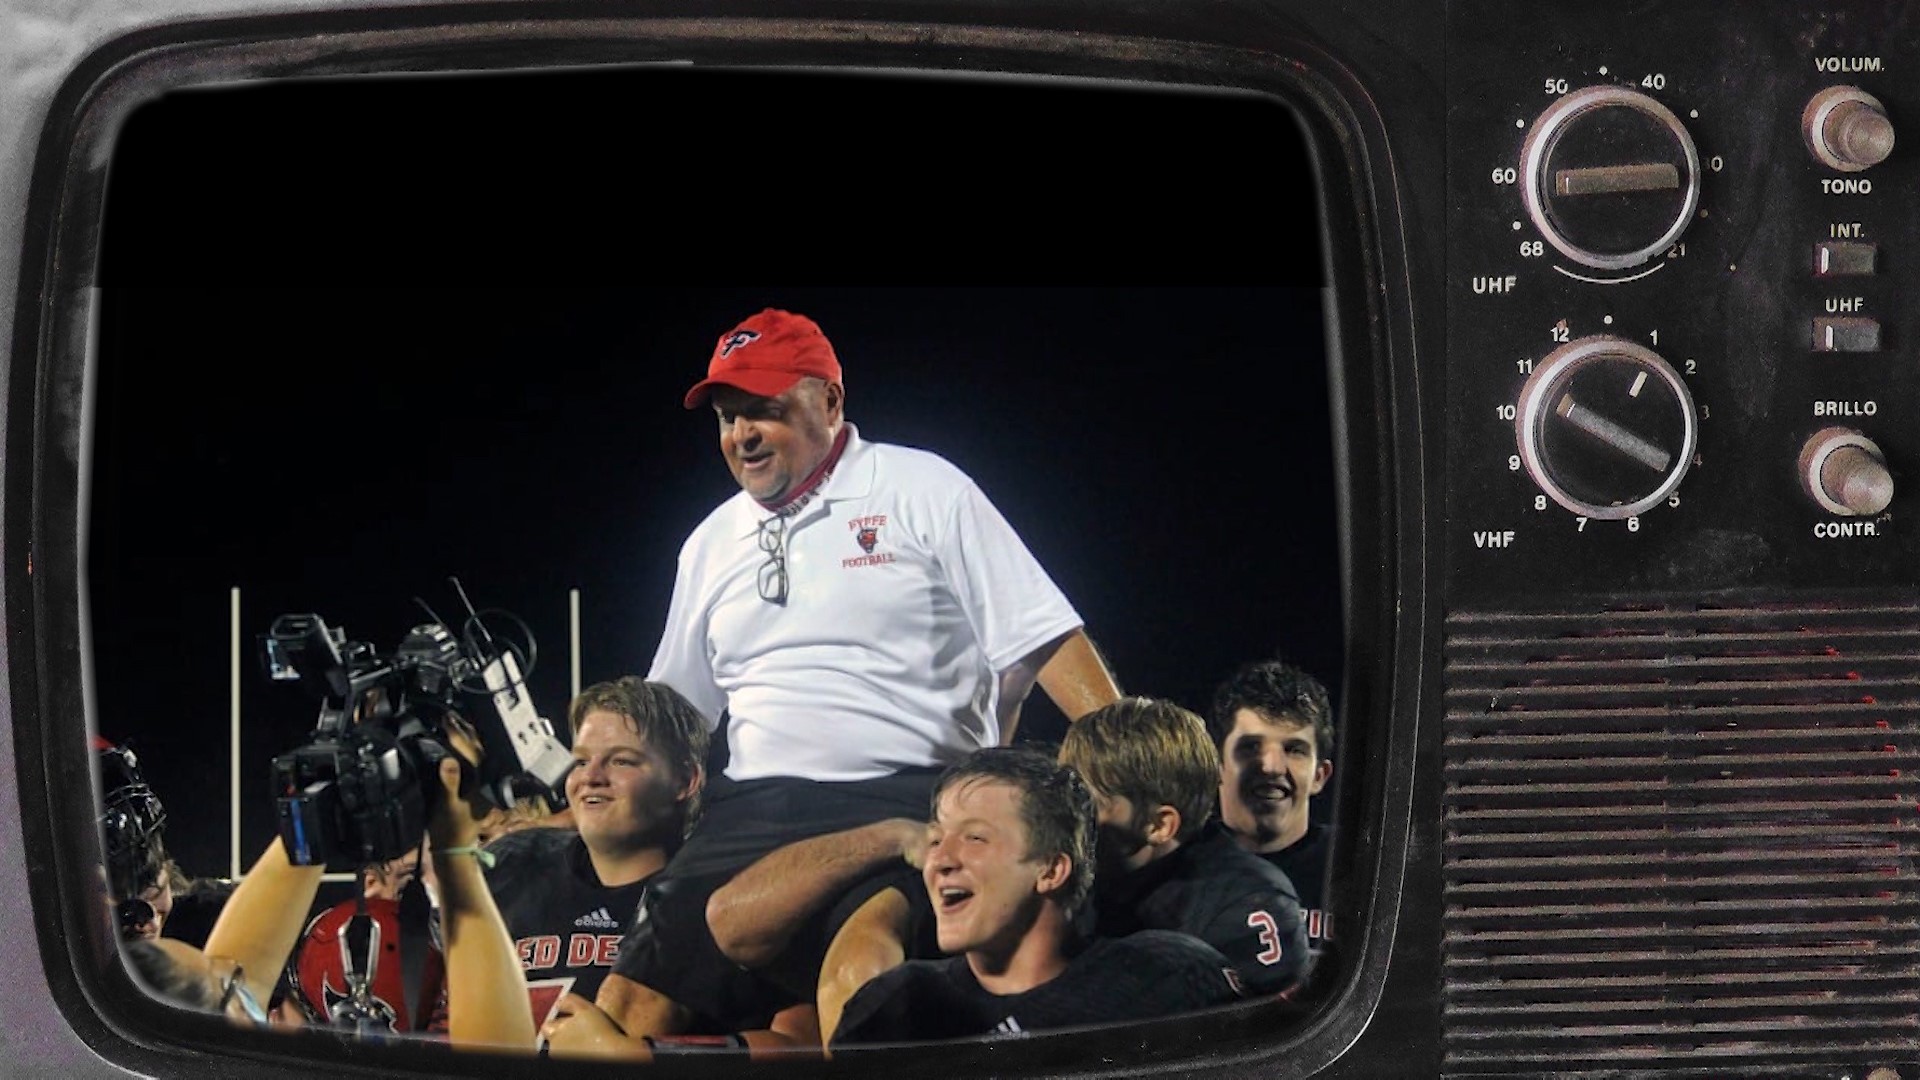 On Sept. 11, 1992, Paul Benefield won his 1st game  with Sylvania High school. Exactly 28 years later, he got his 300th career victory as Fyffe defeated Sylvania.